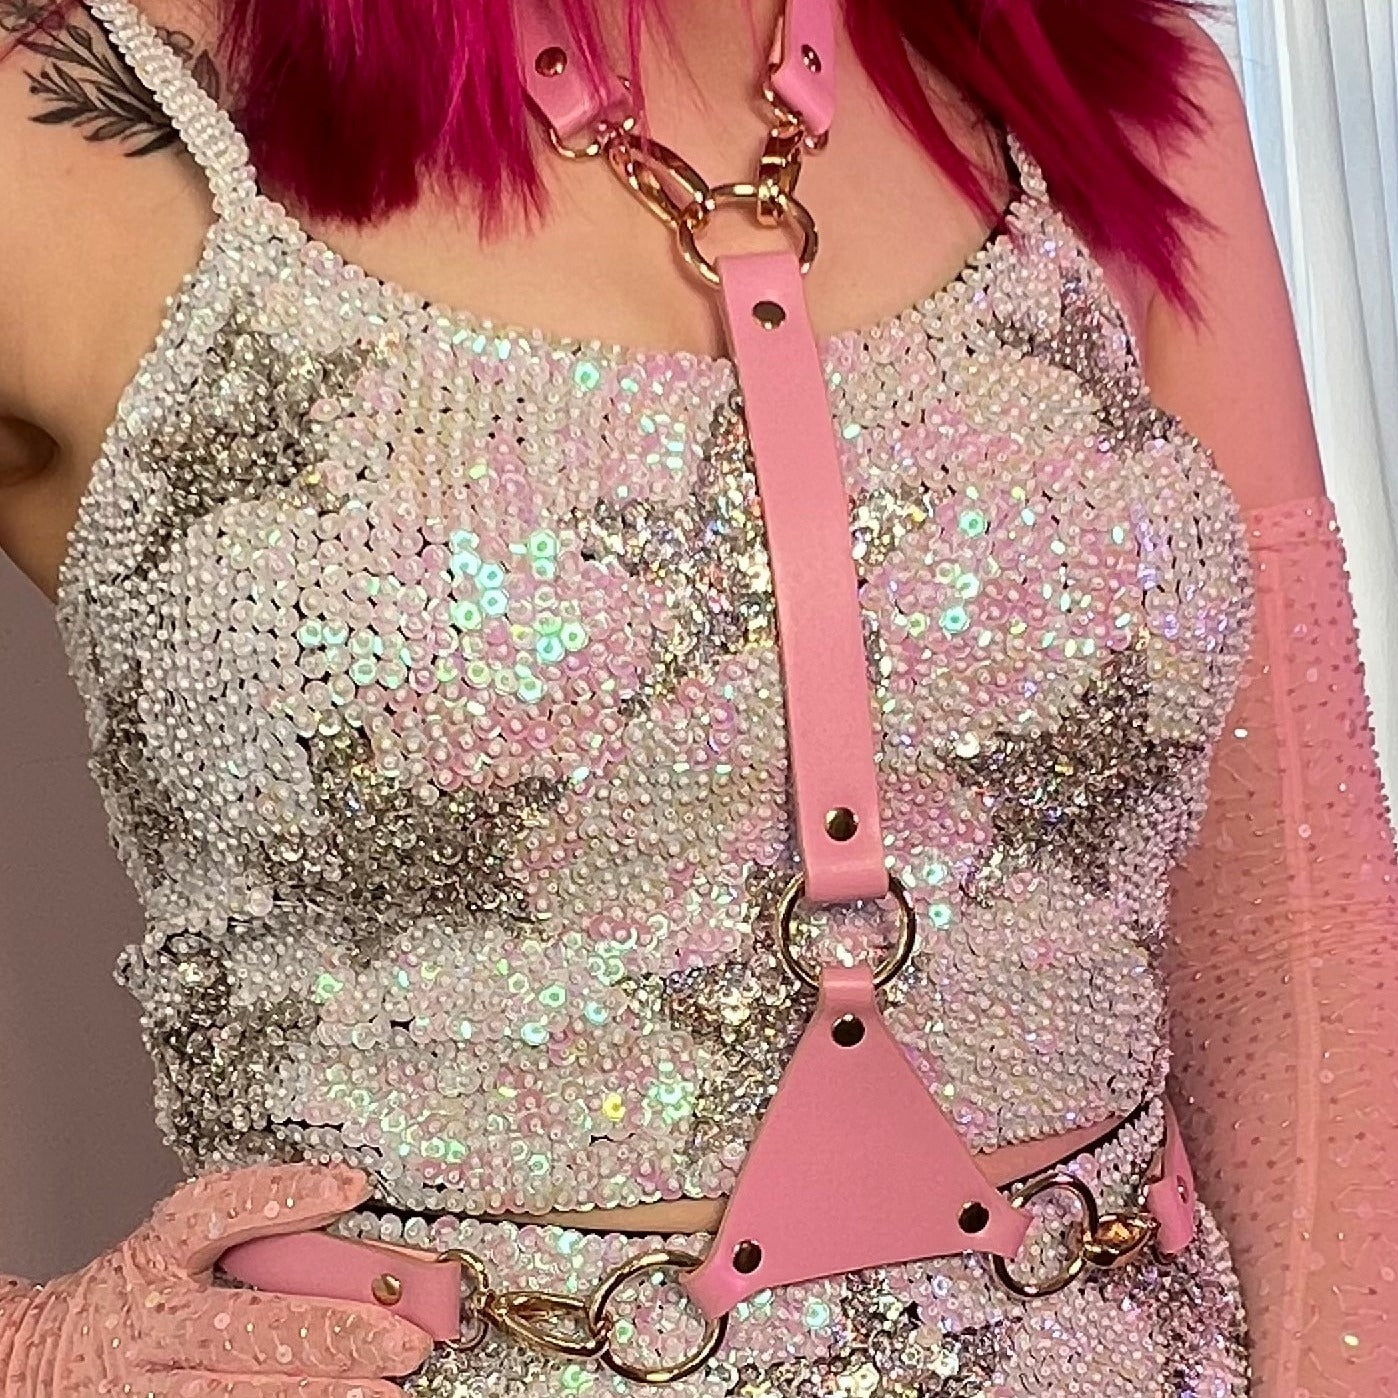 pearl white sequin and holographic silver star festival crop top worn with pink harness and gloves for festival outfit.